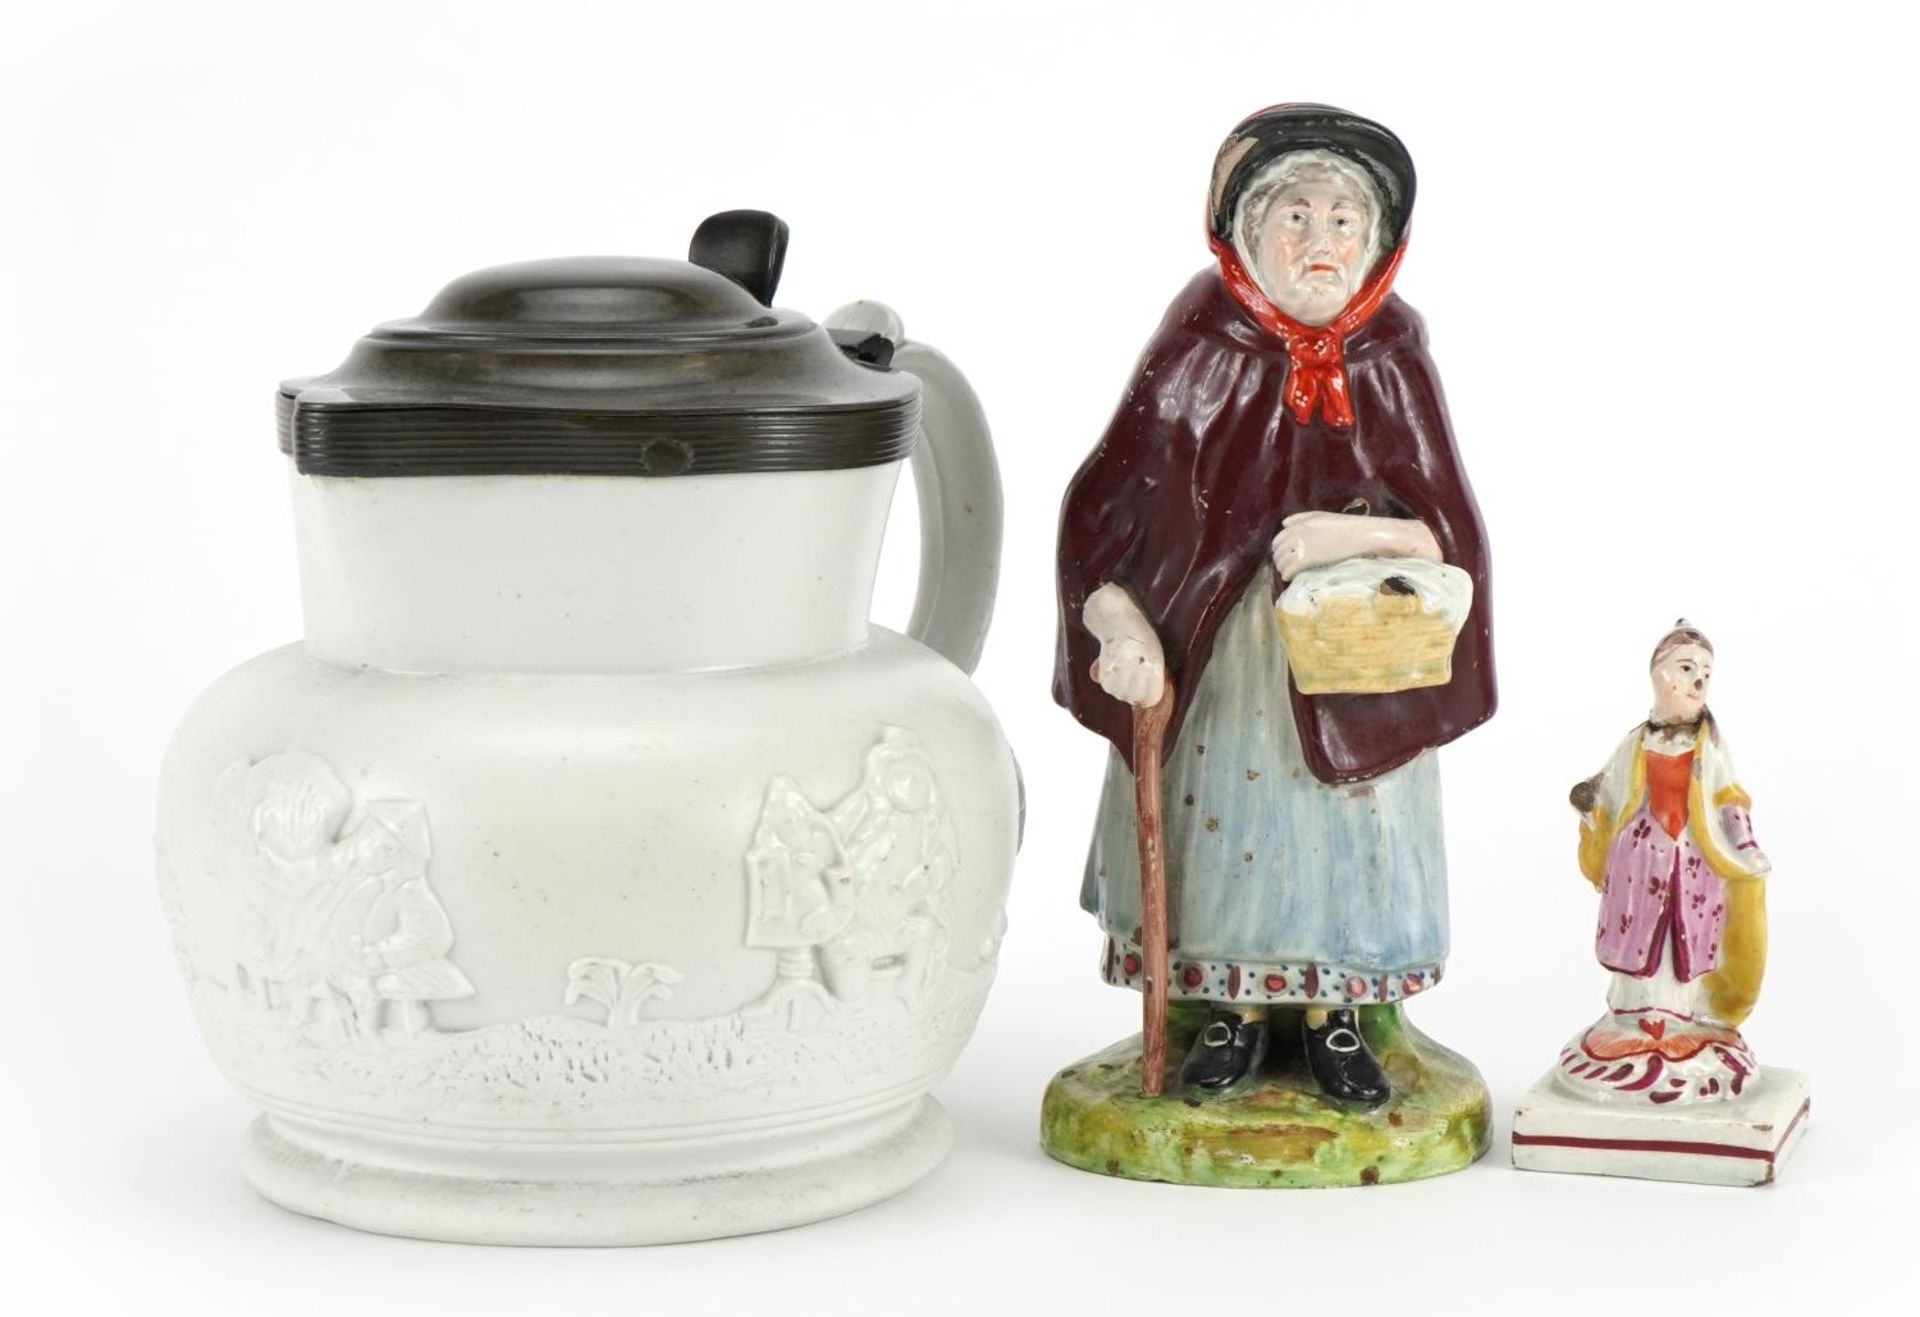 Early 19th century ceramics including a pearlware figure and stoneware jug with pewter mounts, the